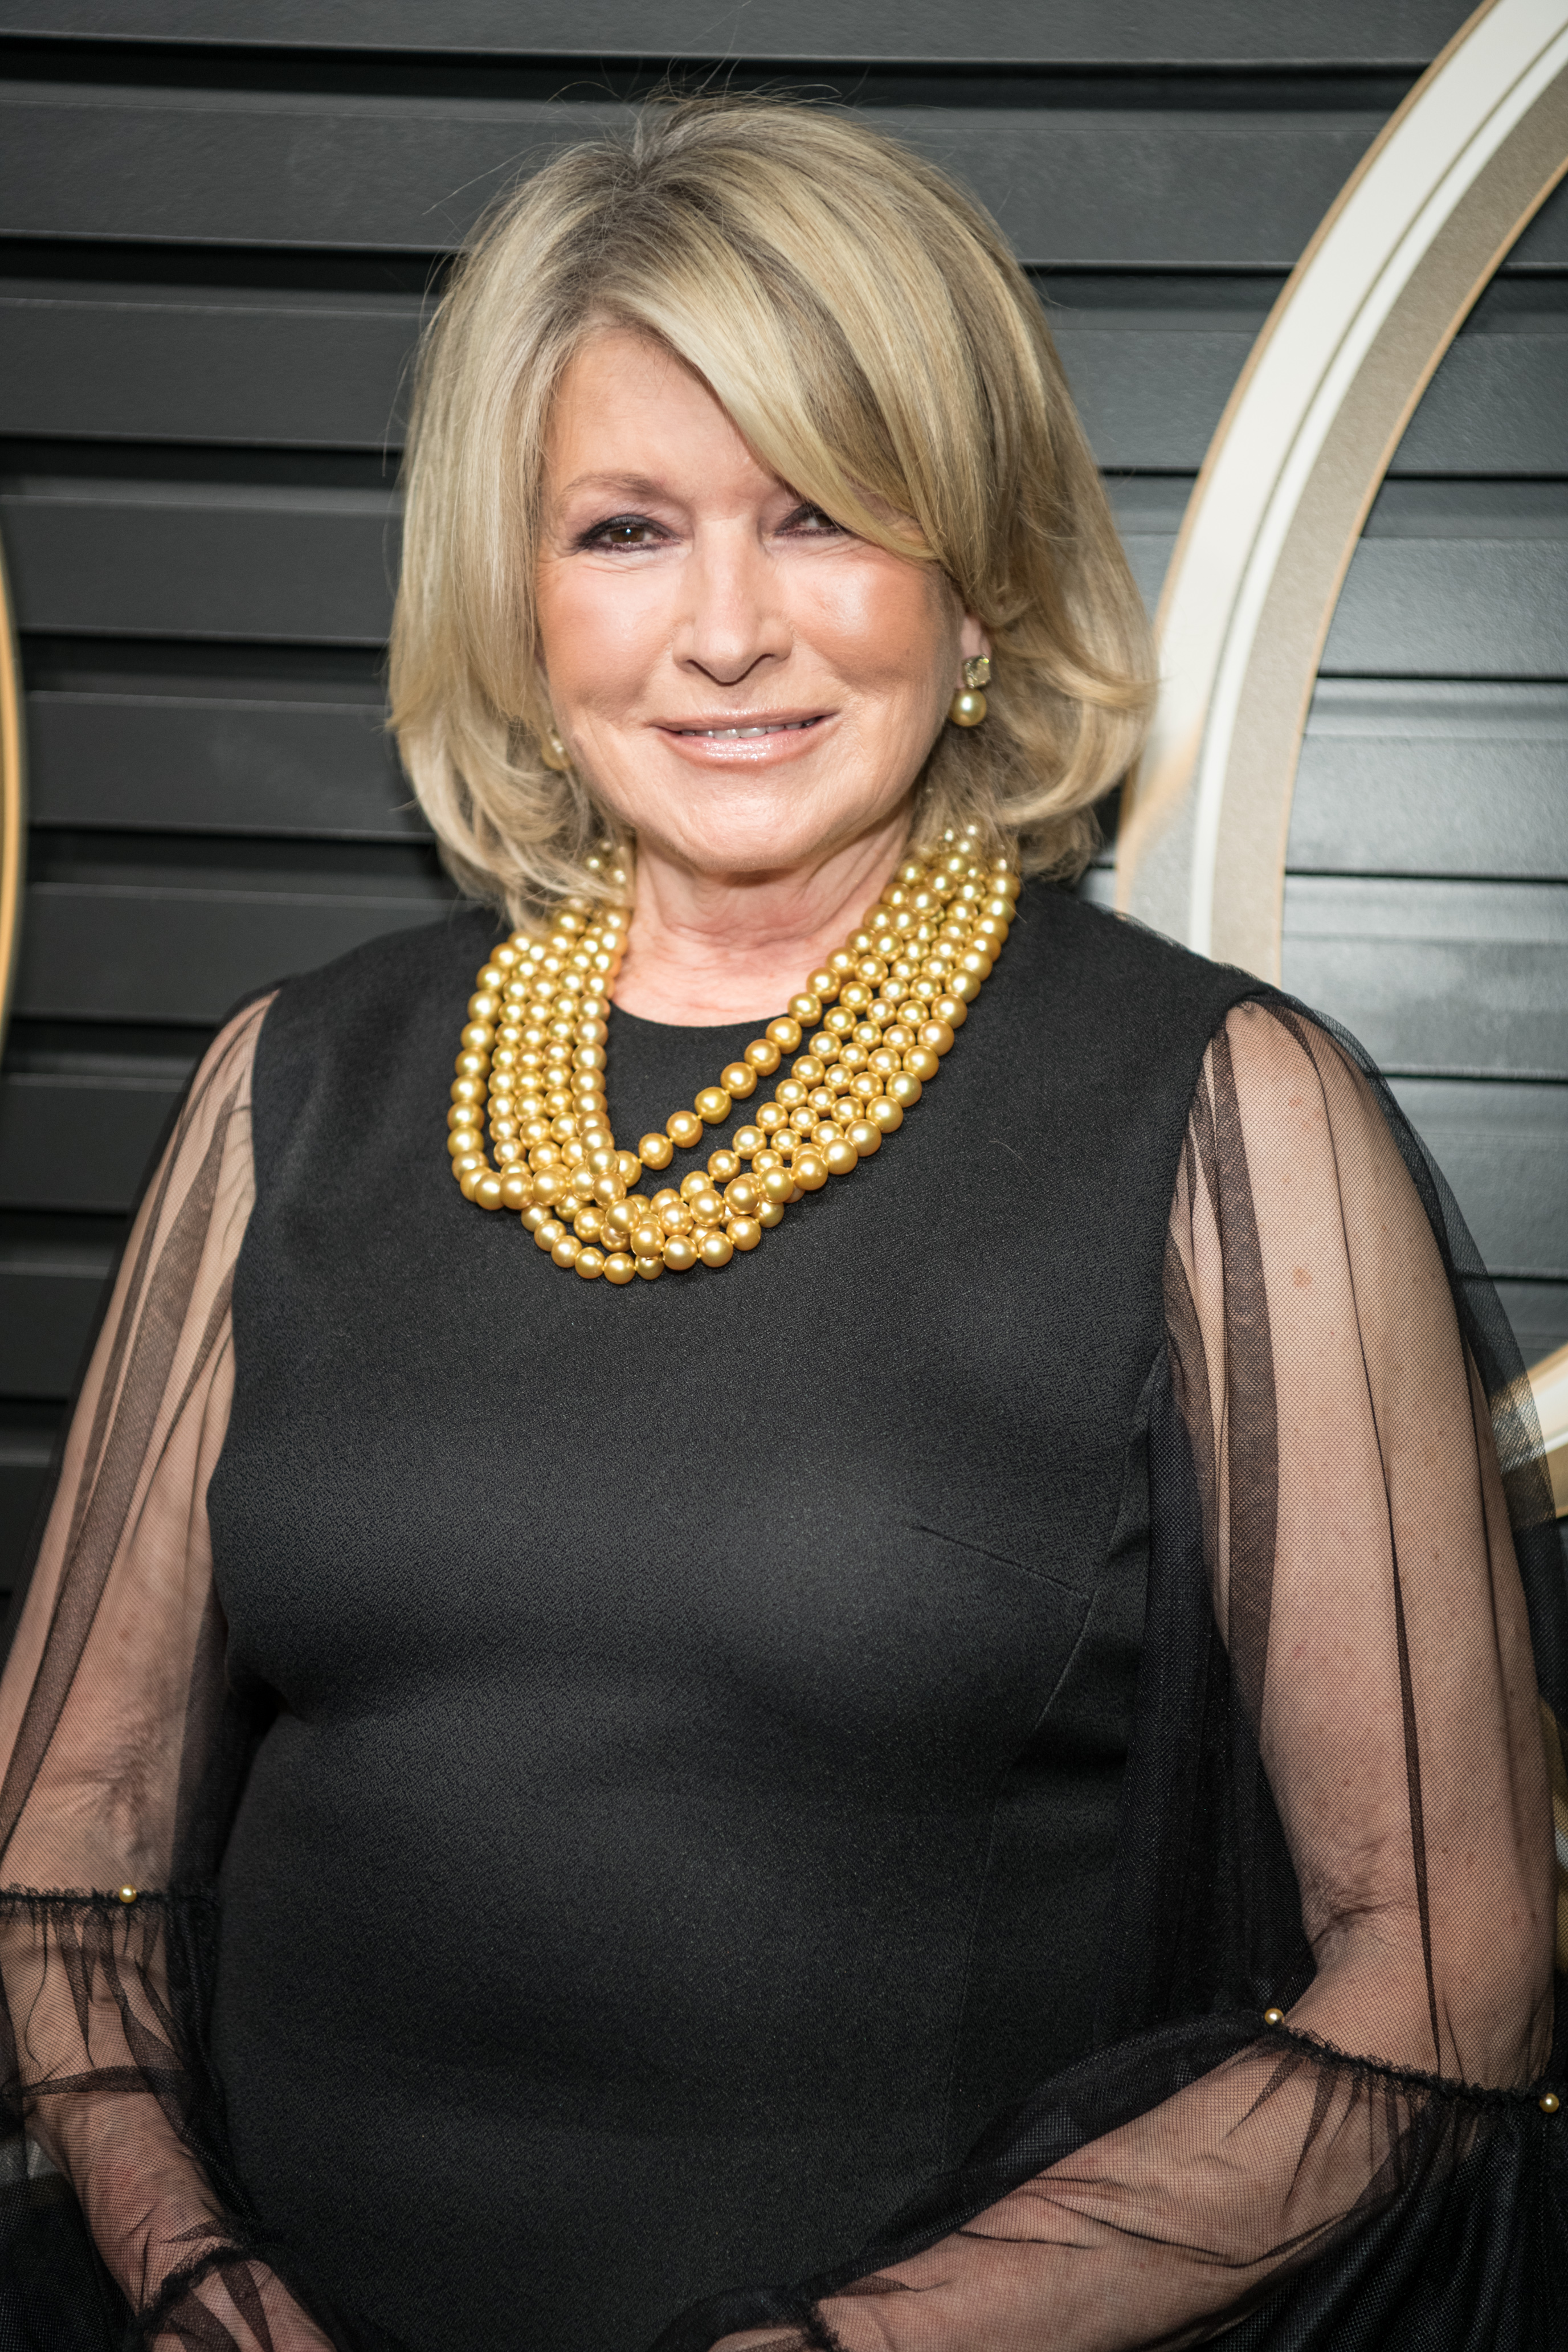 Martha Stewart during the 2020 Mercedes-Benz Annual Academy Viewing Party at Four Seasons Los Angeles at Beverly Hills | Source: Getty Images